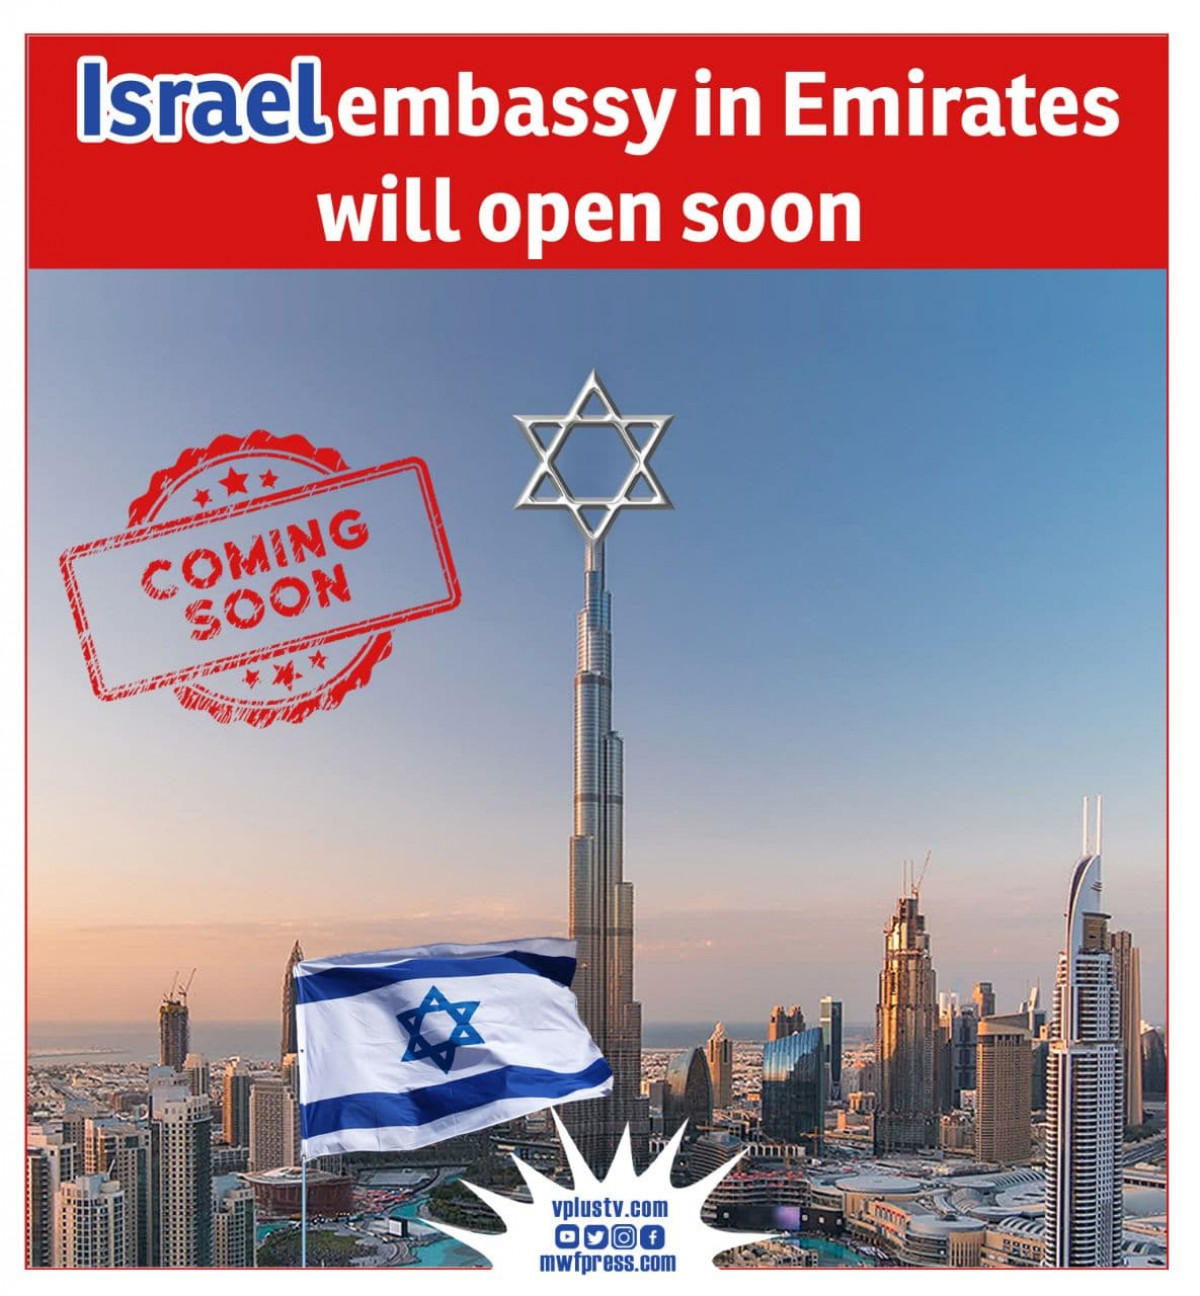 Israel embassy in Emirates will open soon